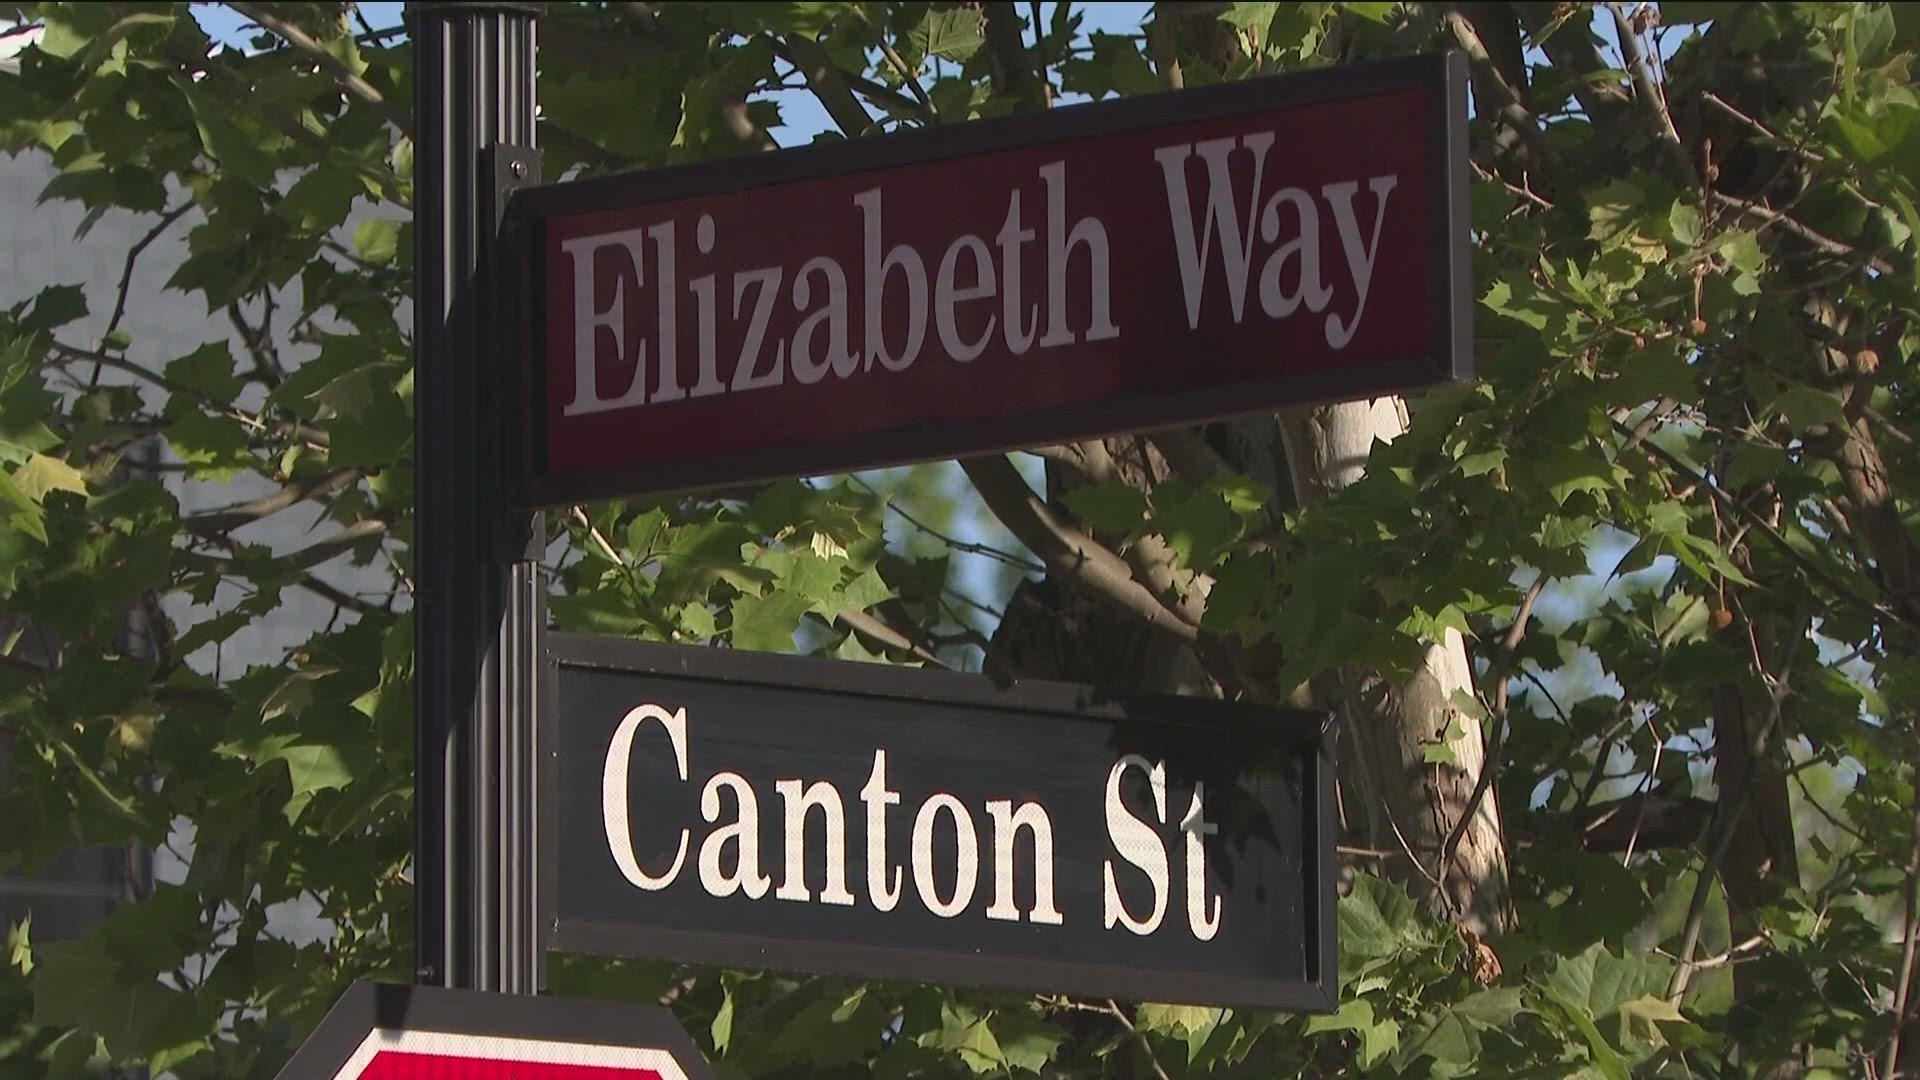 Discussions over a proposal to close a portion of Canton Street to vehicle traffic continued Tuesday during a special meeting.